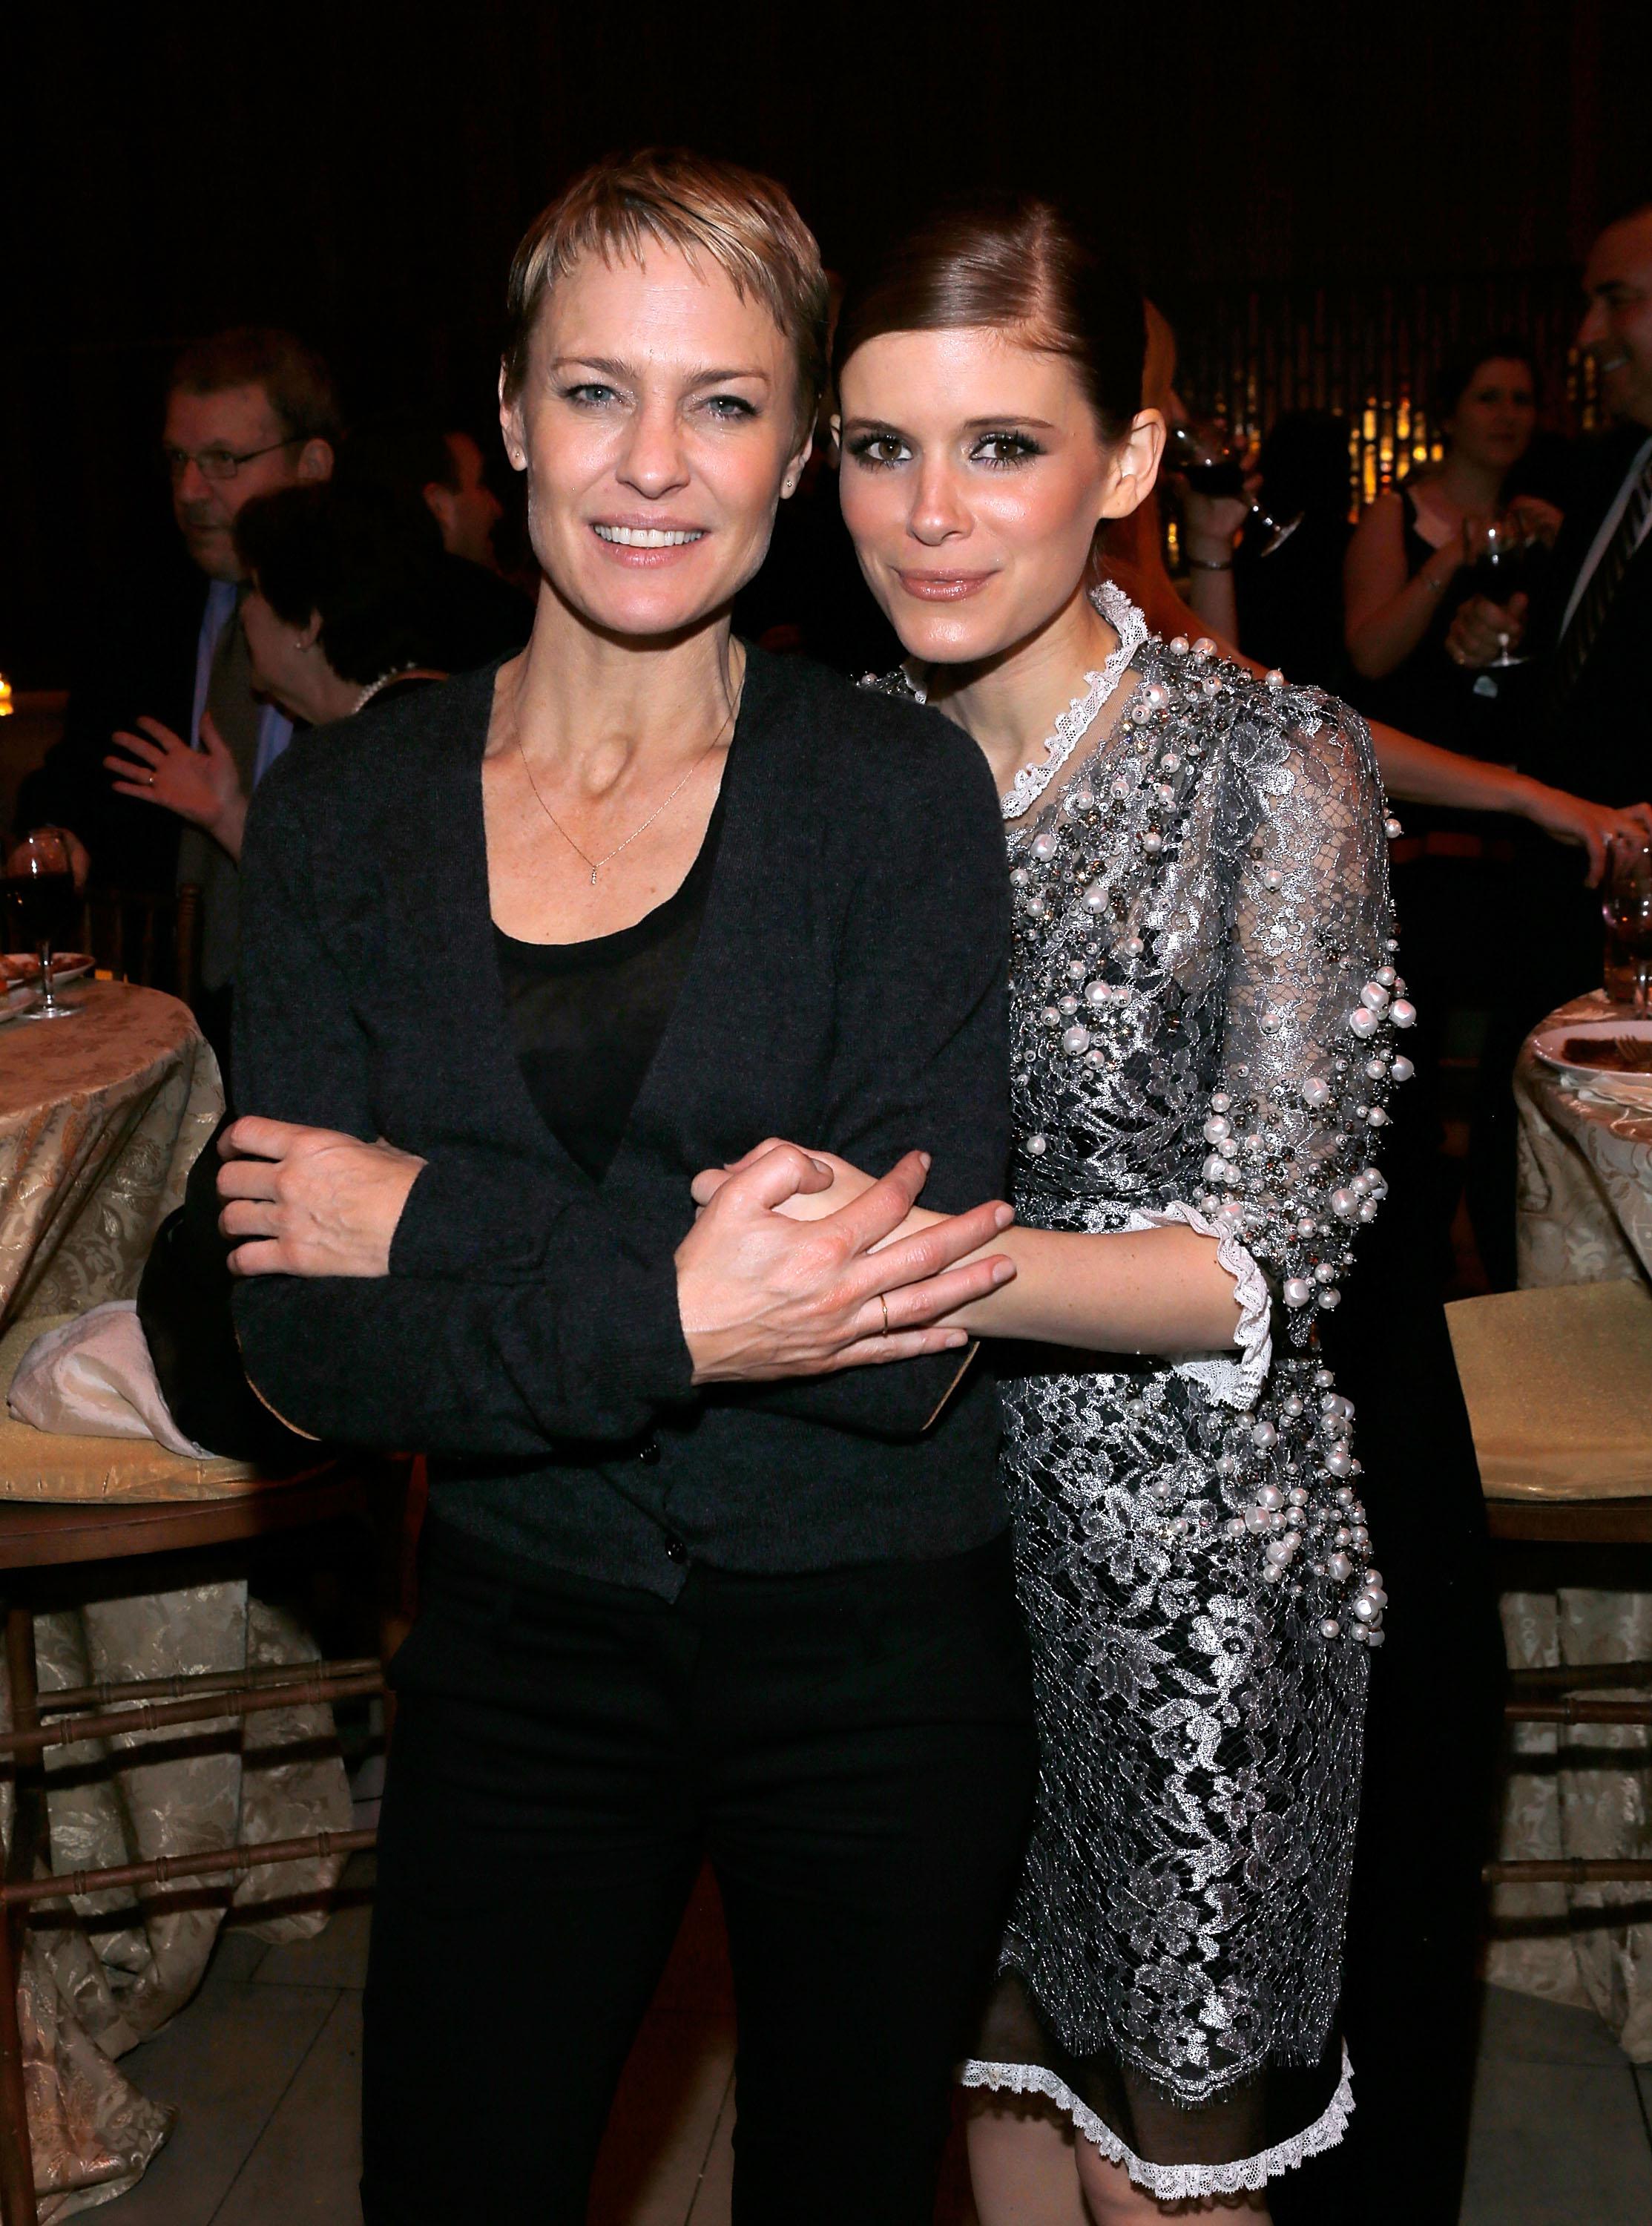 Actors Robin Wright and Kate Mara attend Netflix's House Of Cards New York premiere after-party at Alice Tully Hall on Jan. 30, 2013, in New York City.